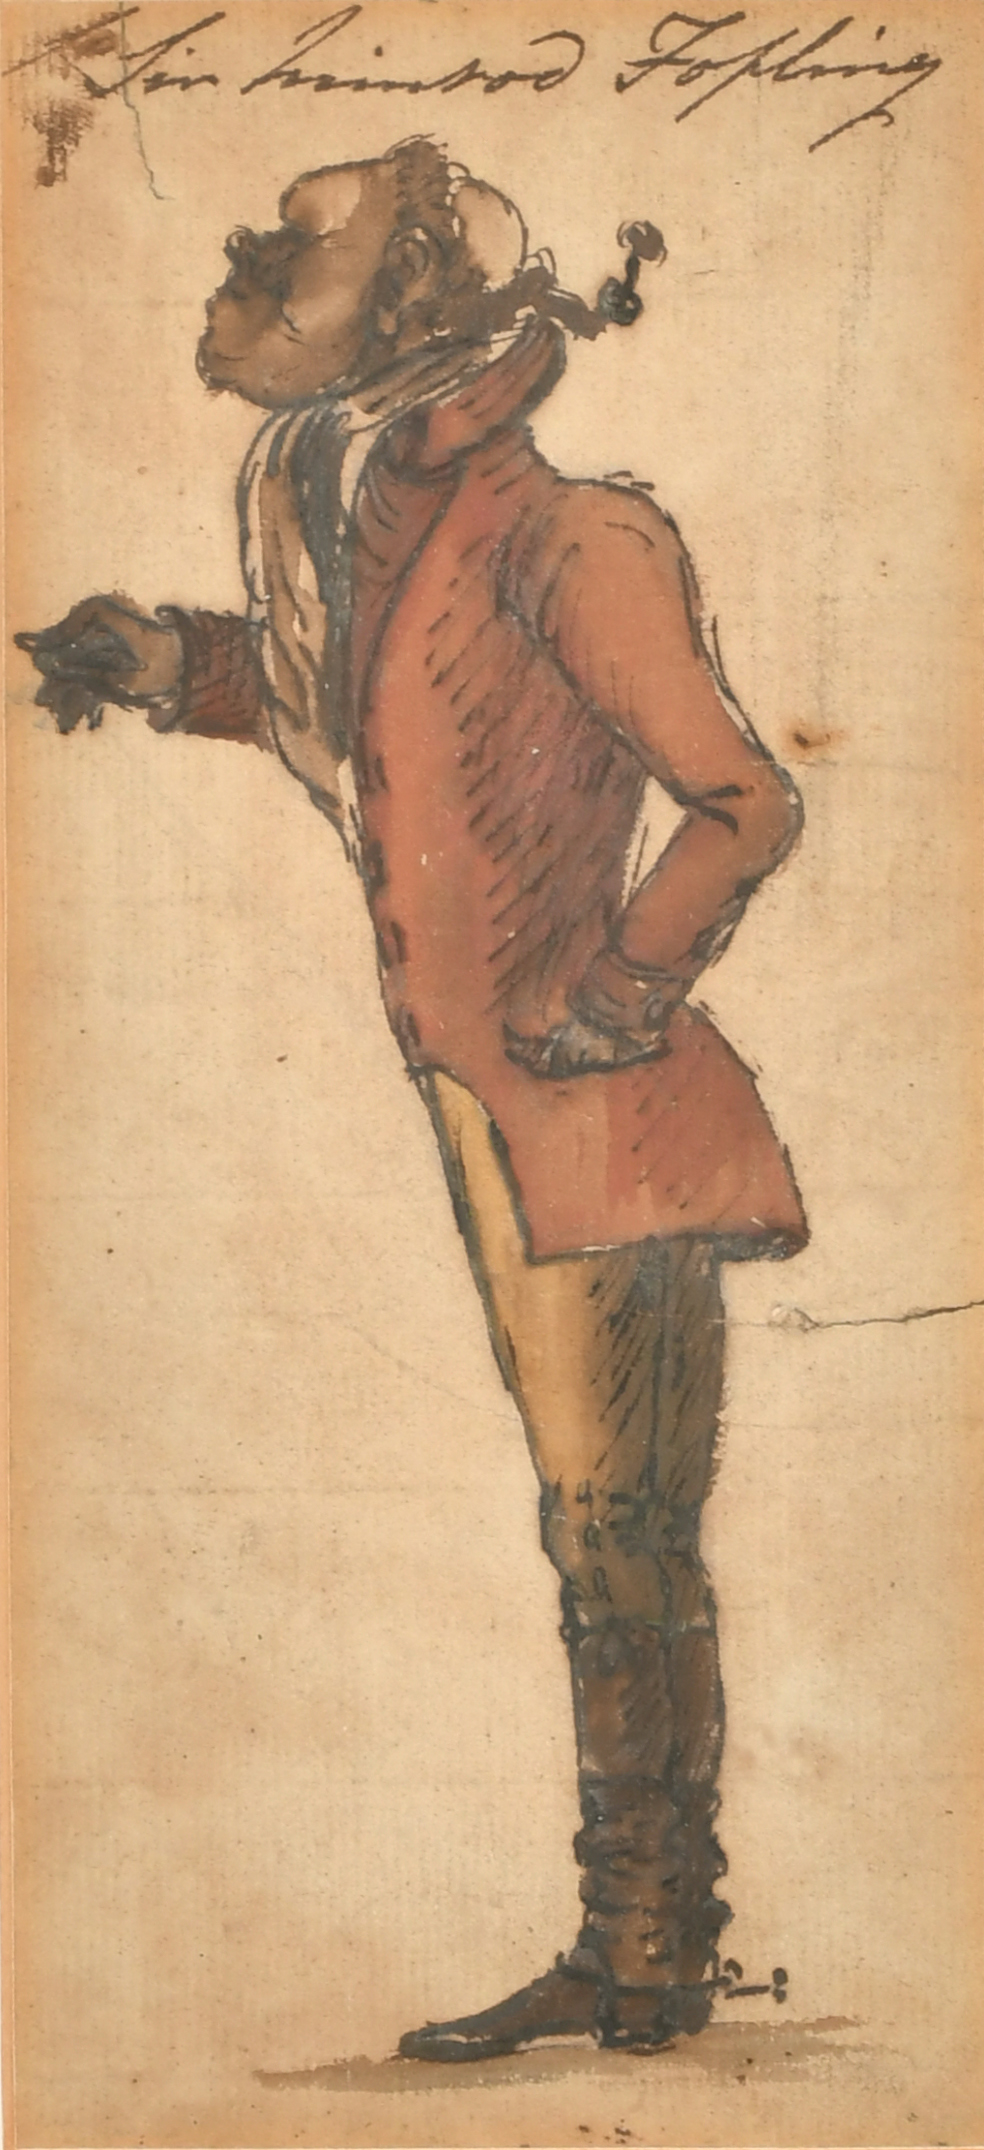 19th Century English School. "Sir Jopling", Watercolour and Ink, Inscribed, 7.5" x 3.5" (19 x